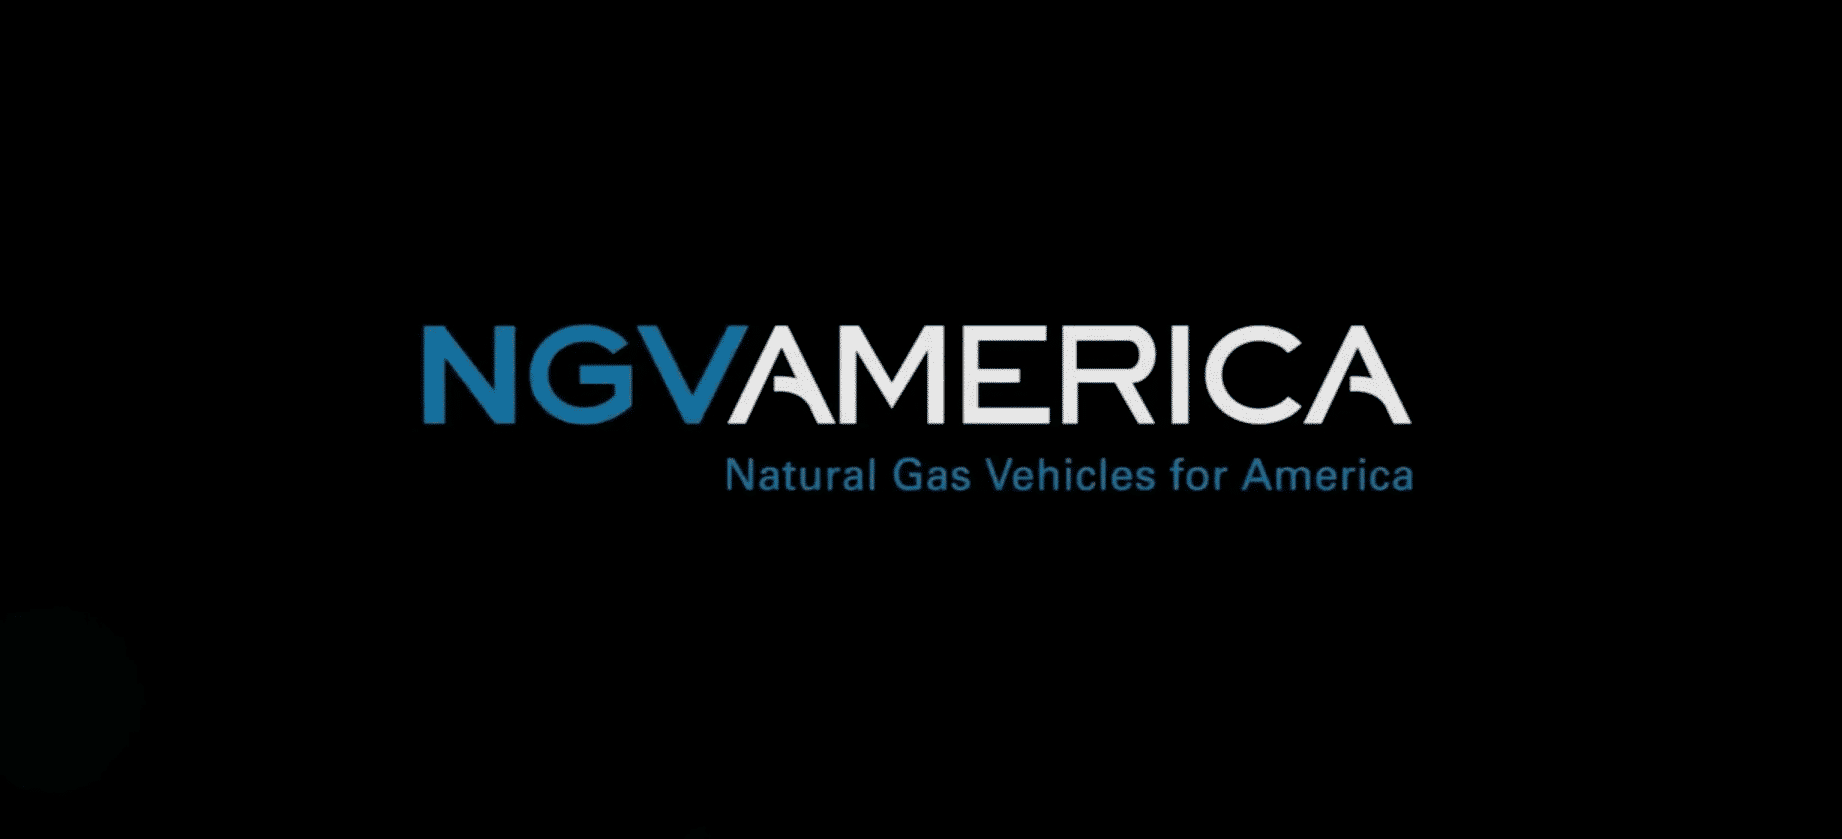 New CNG Guidance, 4-Tiers for CNG Fuel System Inspection | Tank Transport